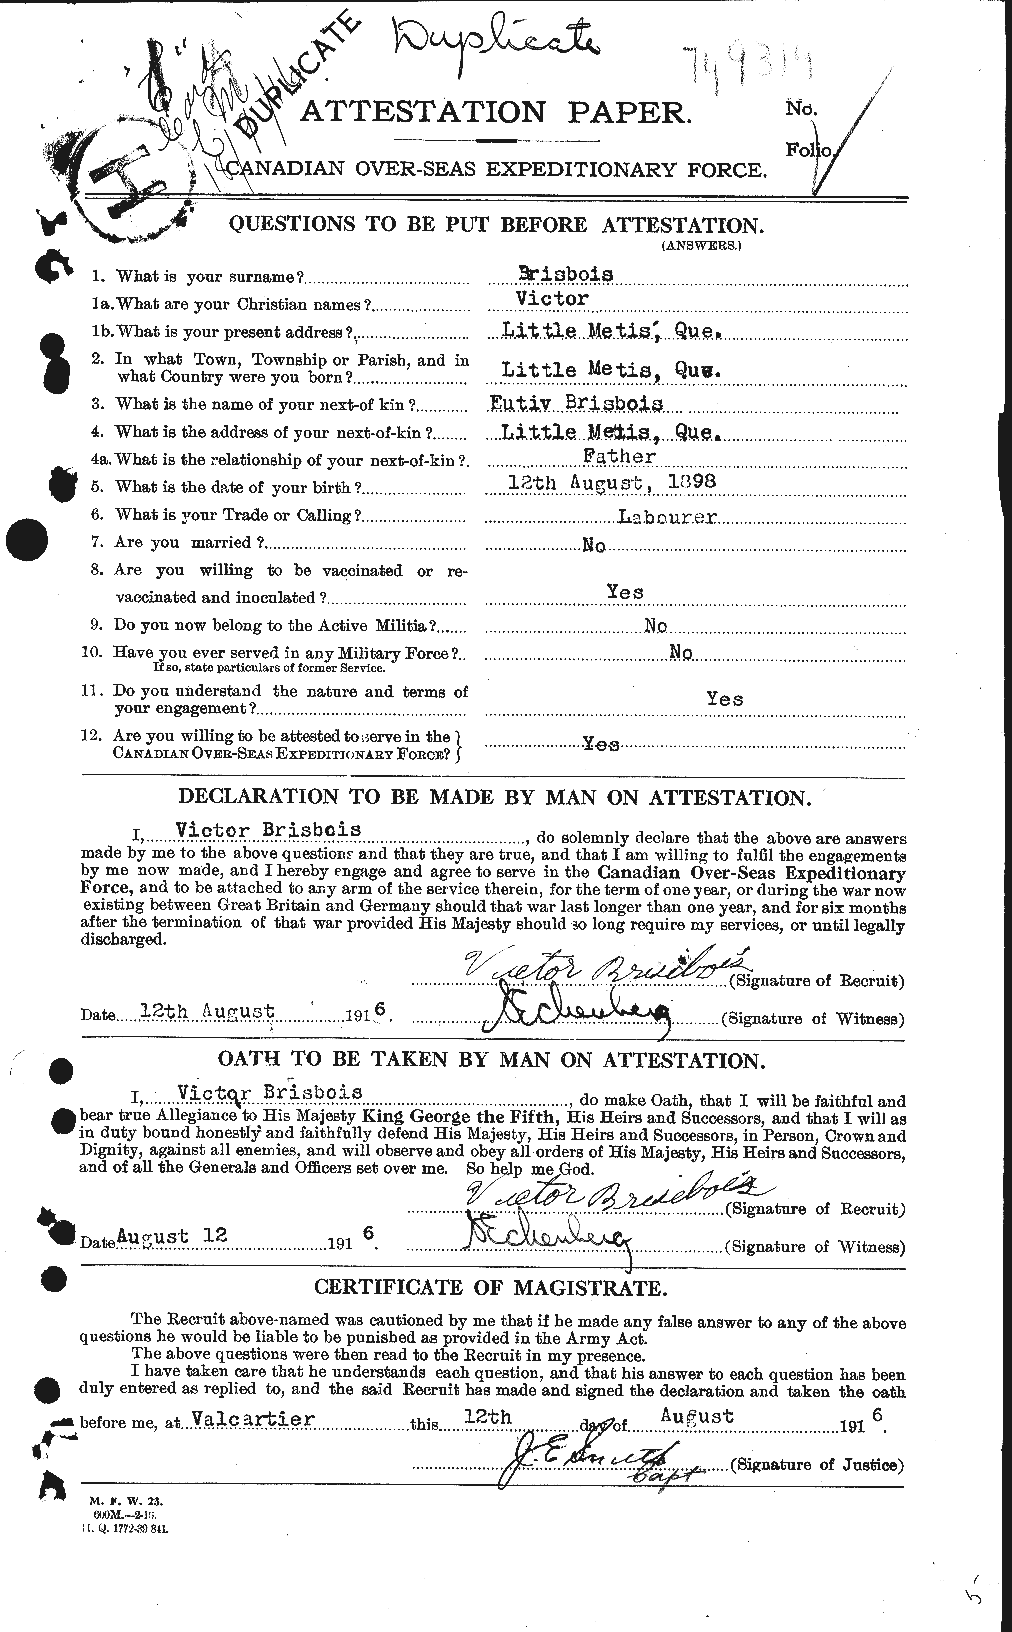 Personnel Records of the First World War - CEF 259449a